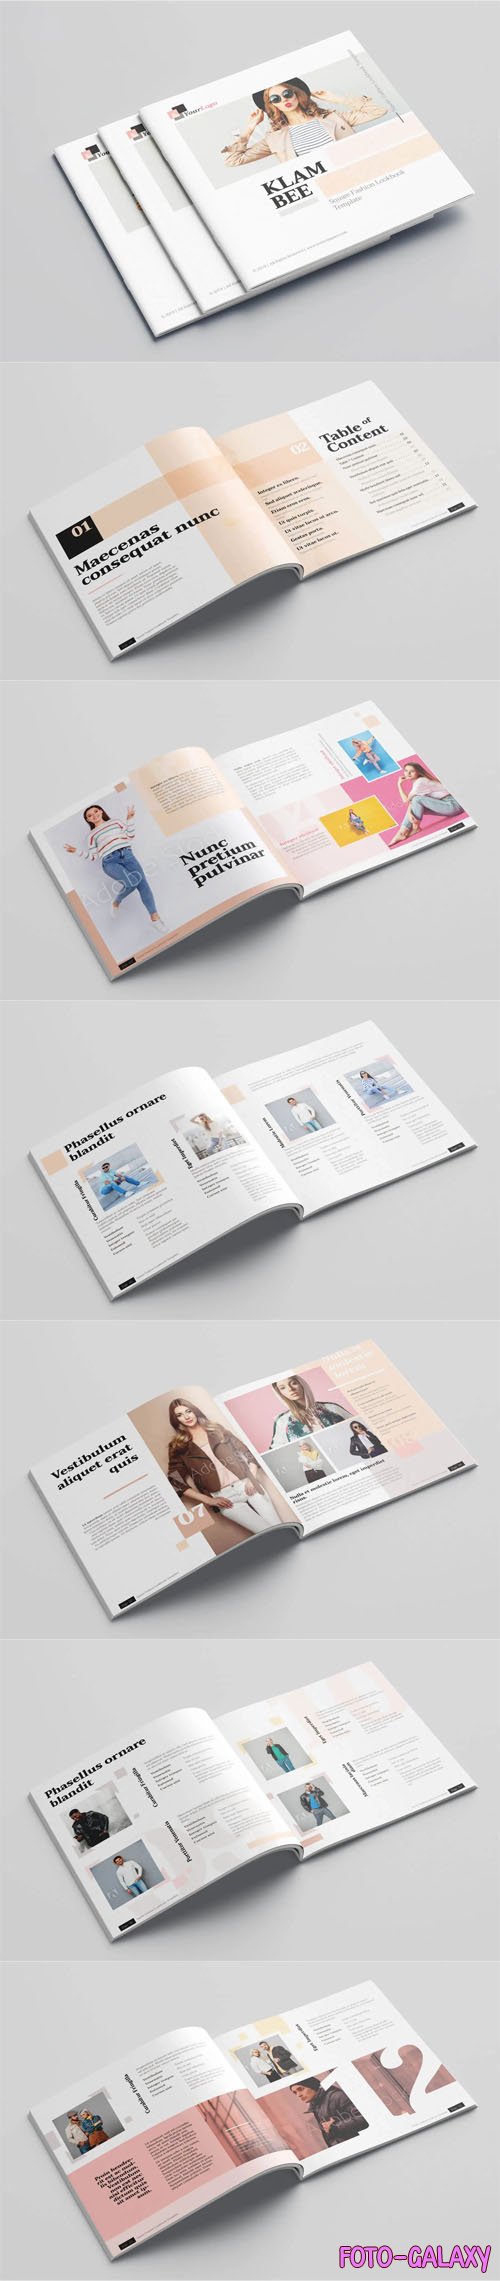 Square Fashion Lookbook INDD Template [24 Pages]